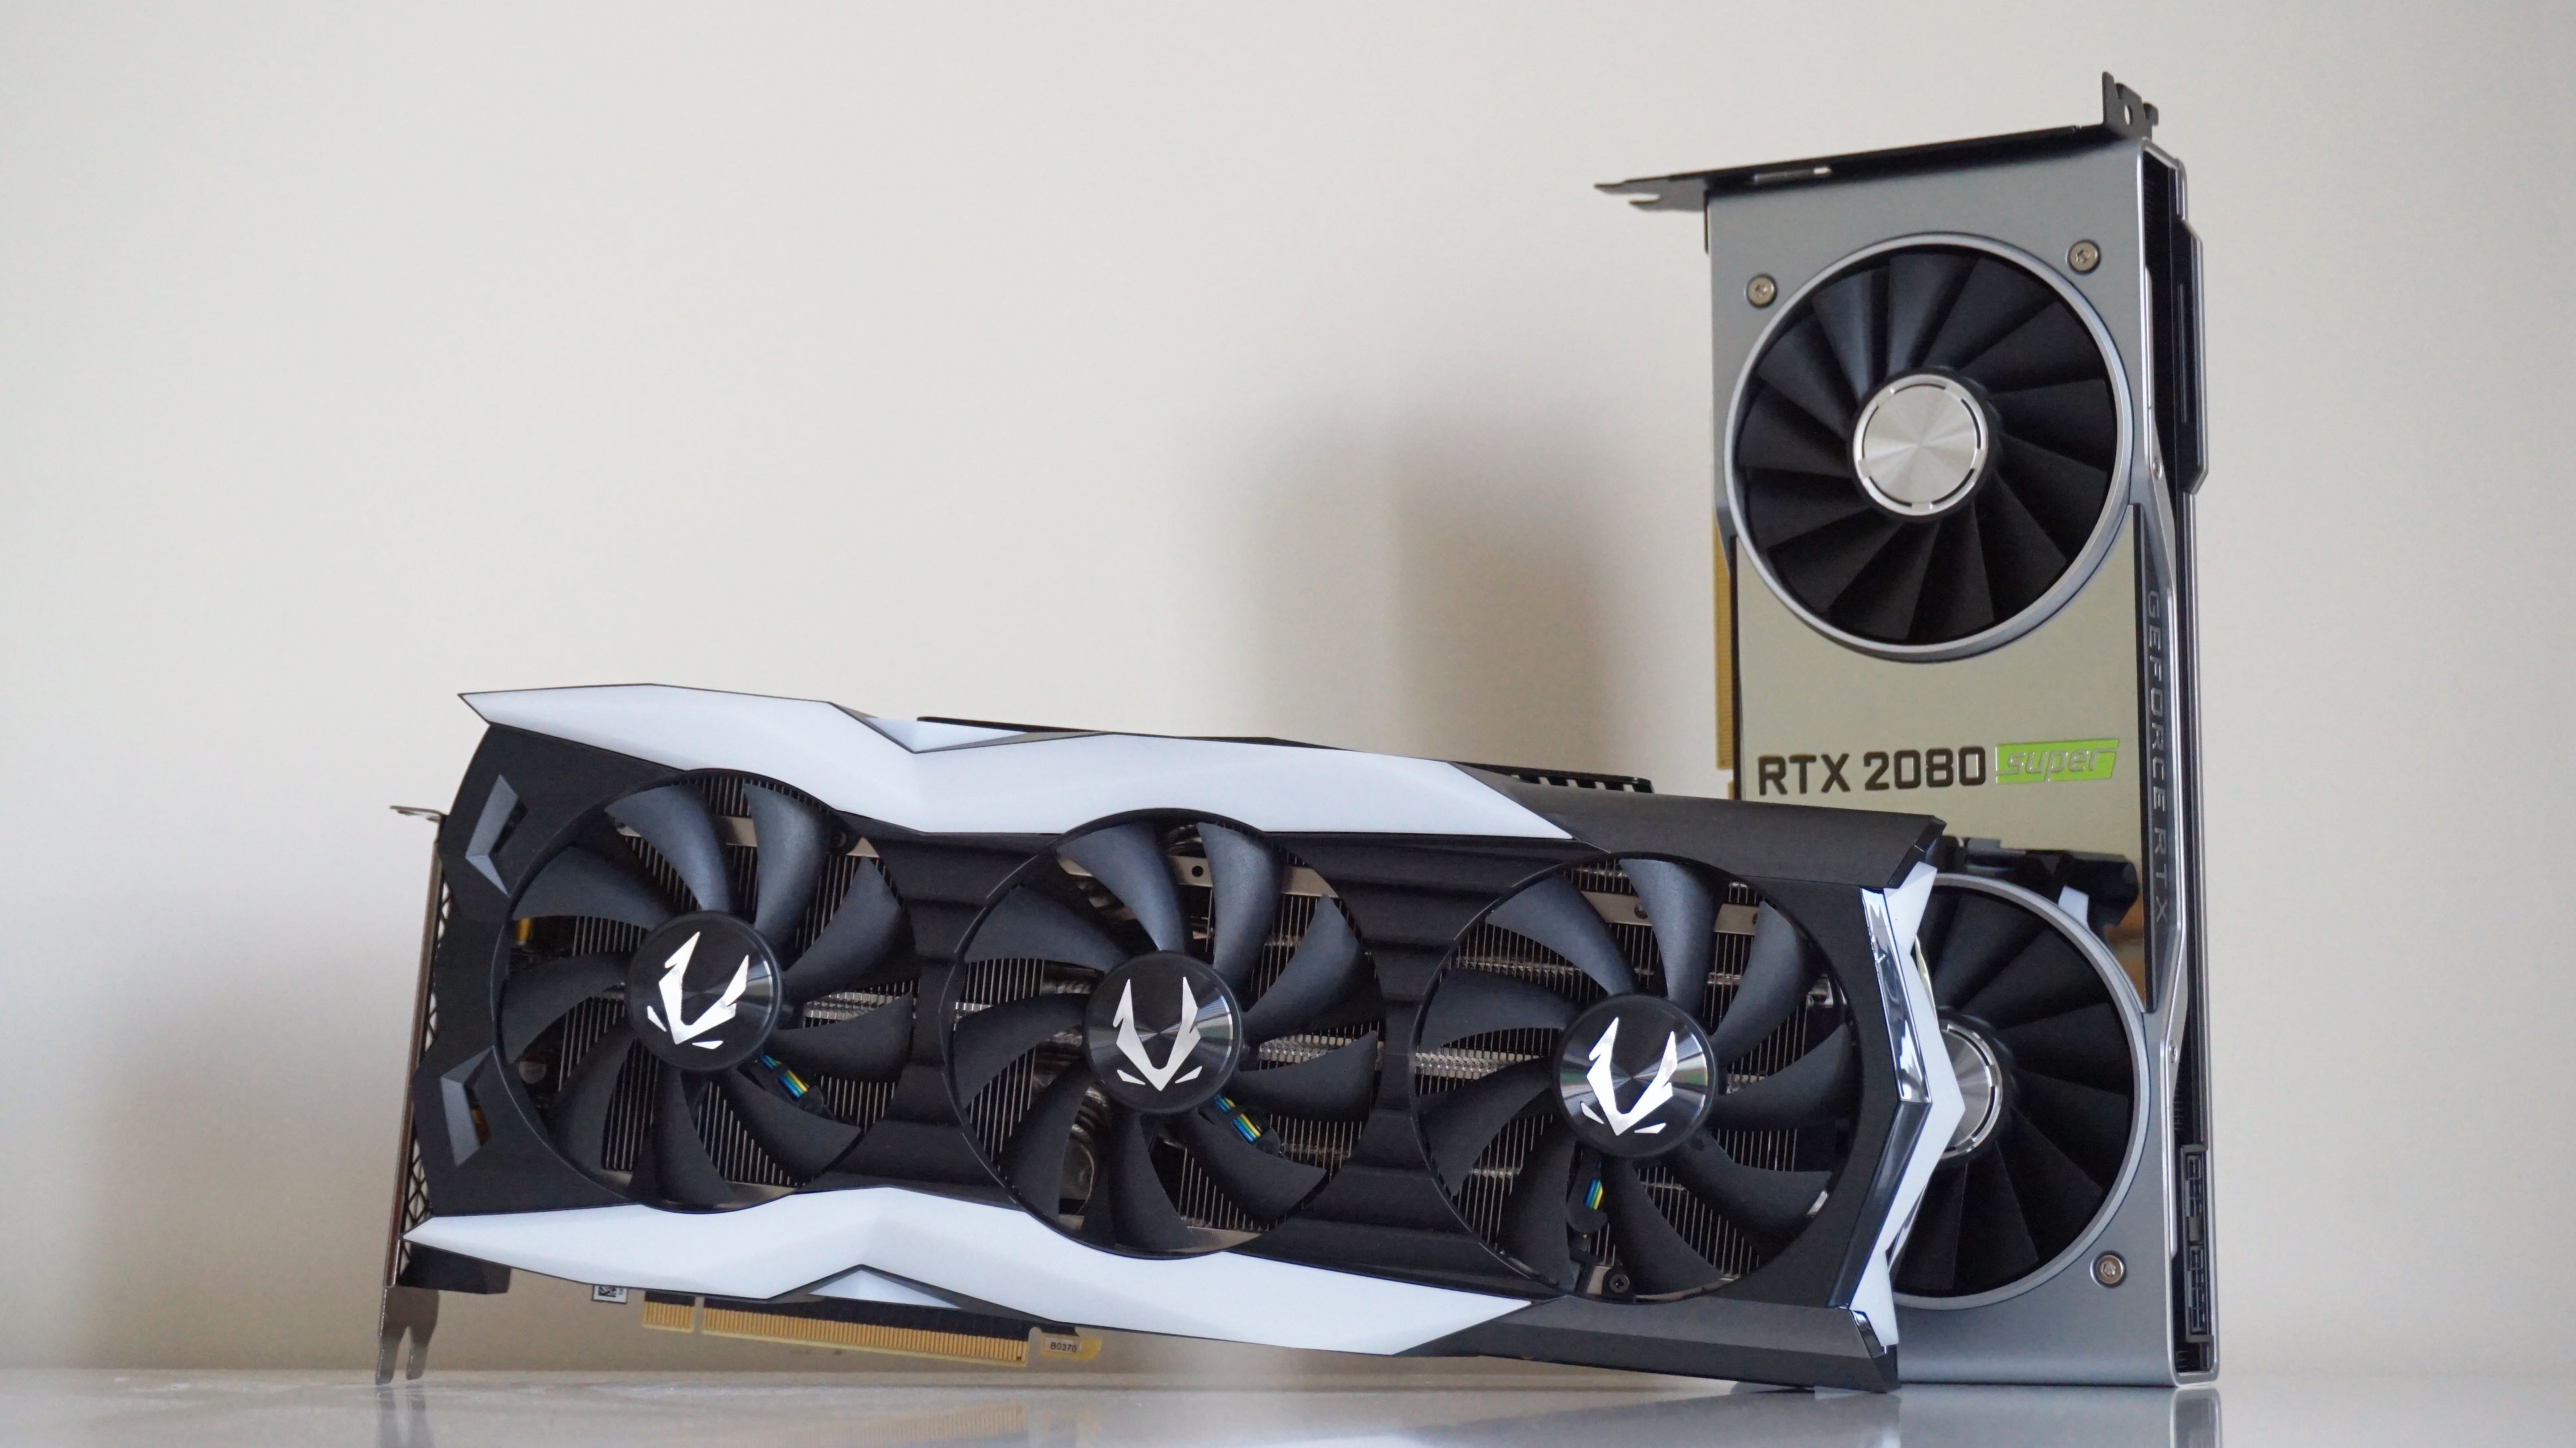 Nvidia RTX 2080 Super benchmarks: Should you pay more for an OC card? |  Rock Paper Shotgun